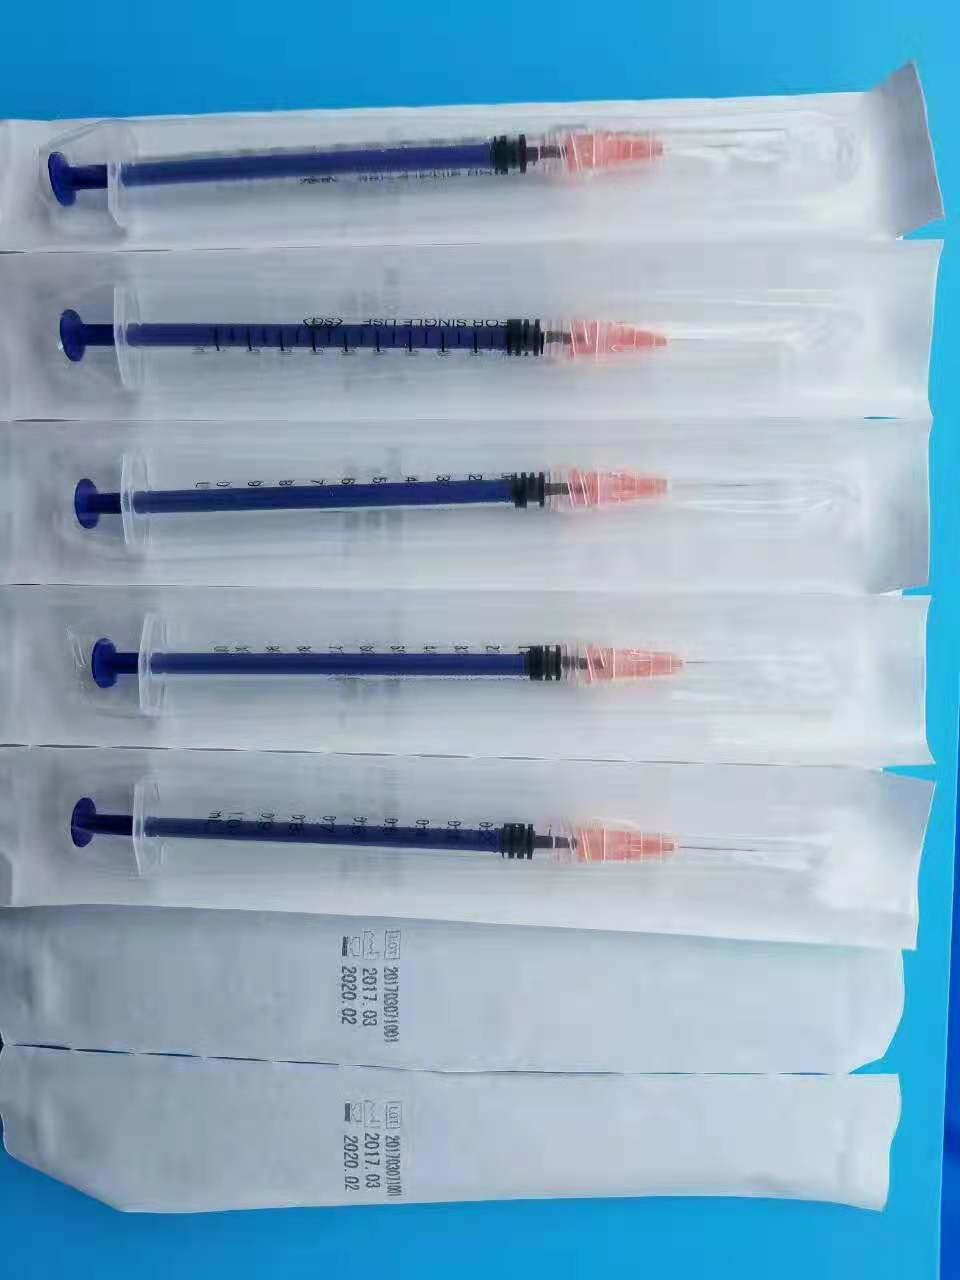 1ml Disposable Syringe Luer Slip with Needle Manufacture with FDA 510K CE&ISO Improved for Vaccine in Stock and Fast Delivery 5ml